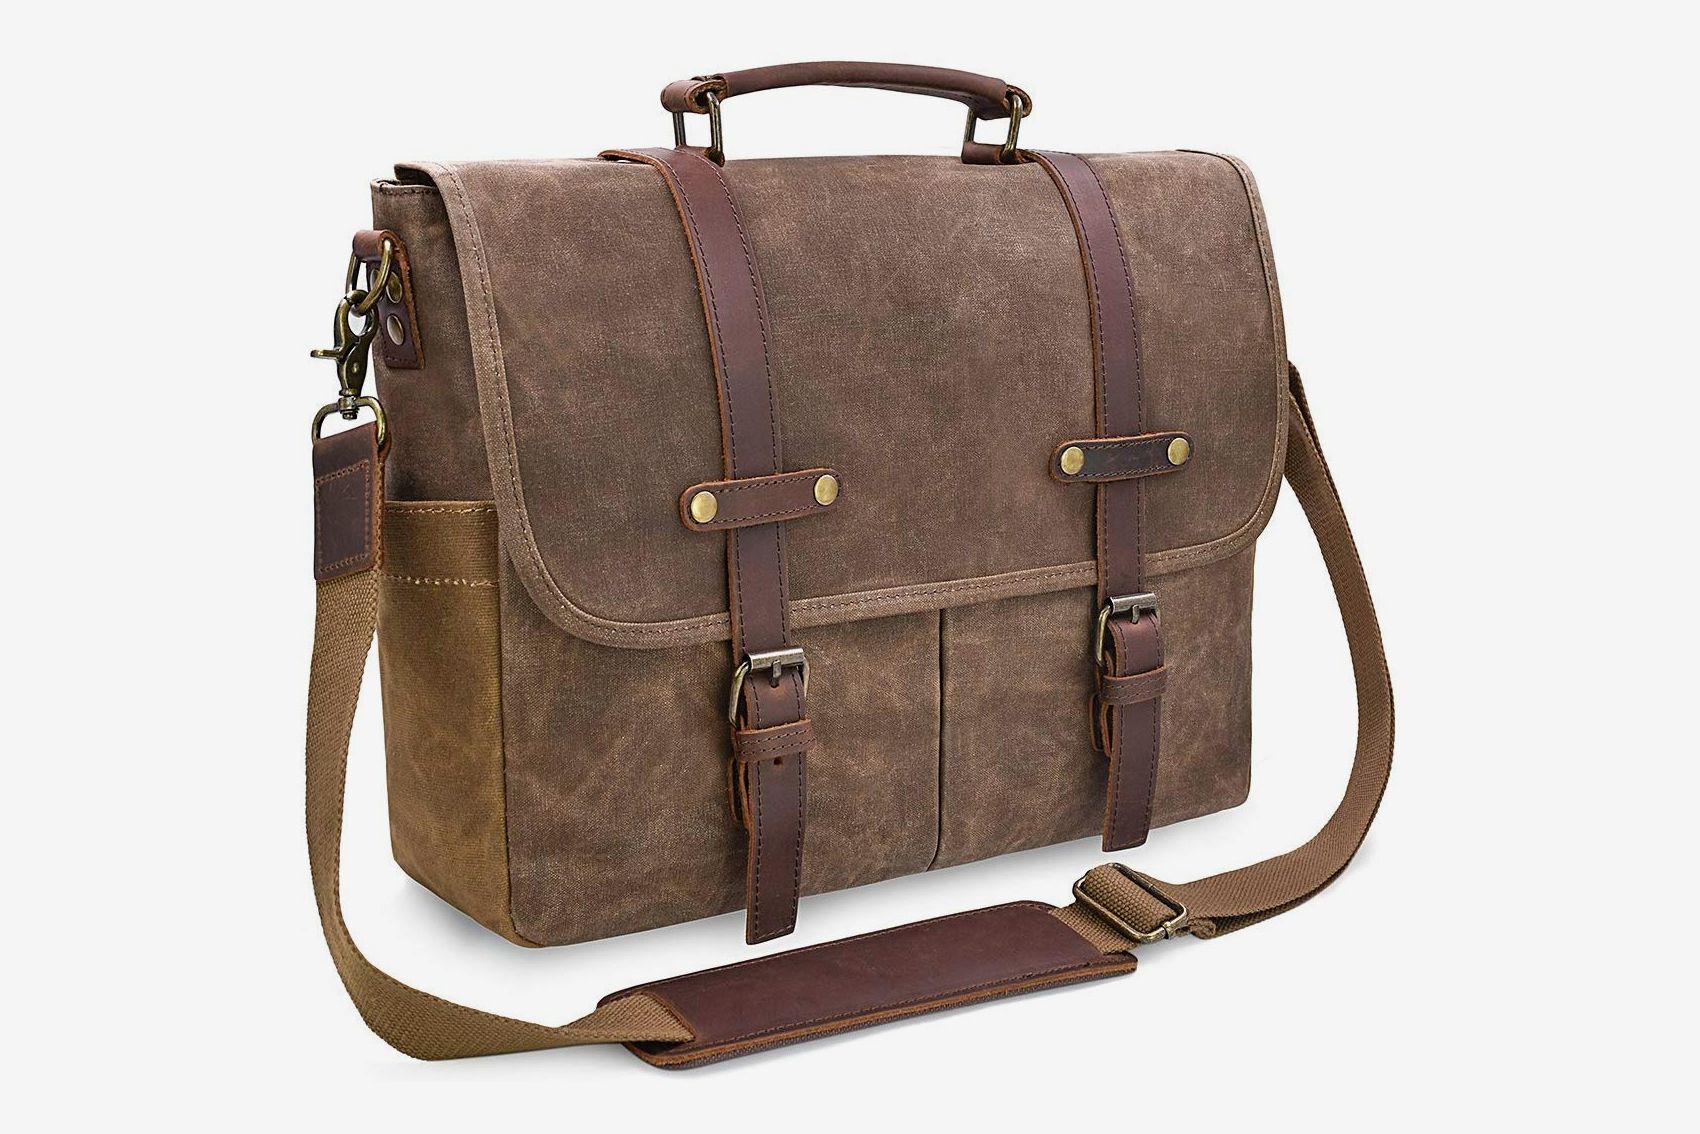 Mens Messenger Bag Mens Briefcase Leather Mens Tote Bag Computer Bags First Layer Leather Business Briefcase Suitable for Business Casual Laptop Bag Briefcase Satchel Bag 